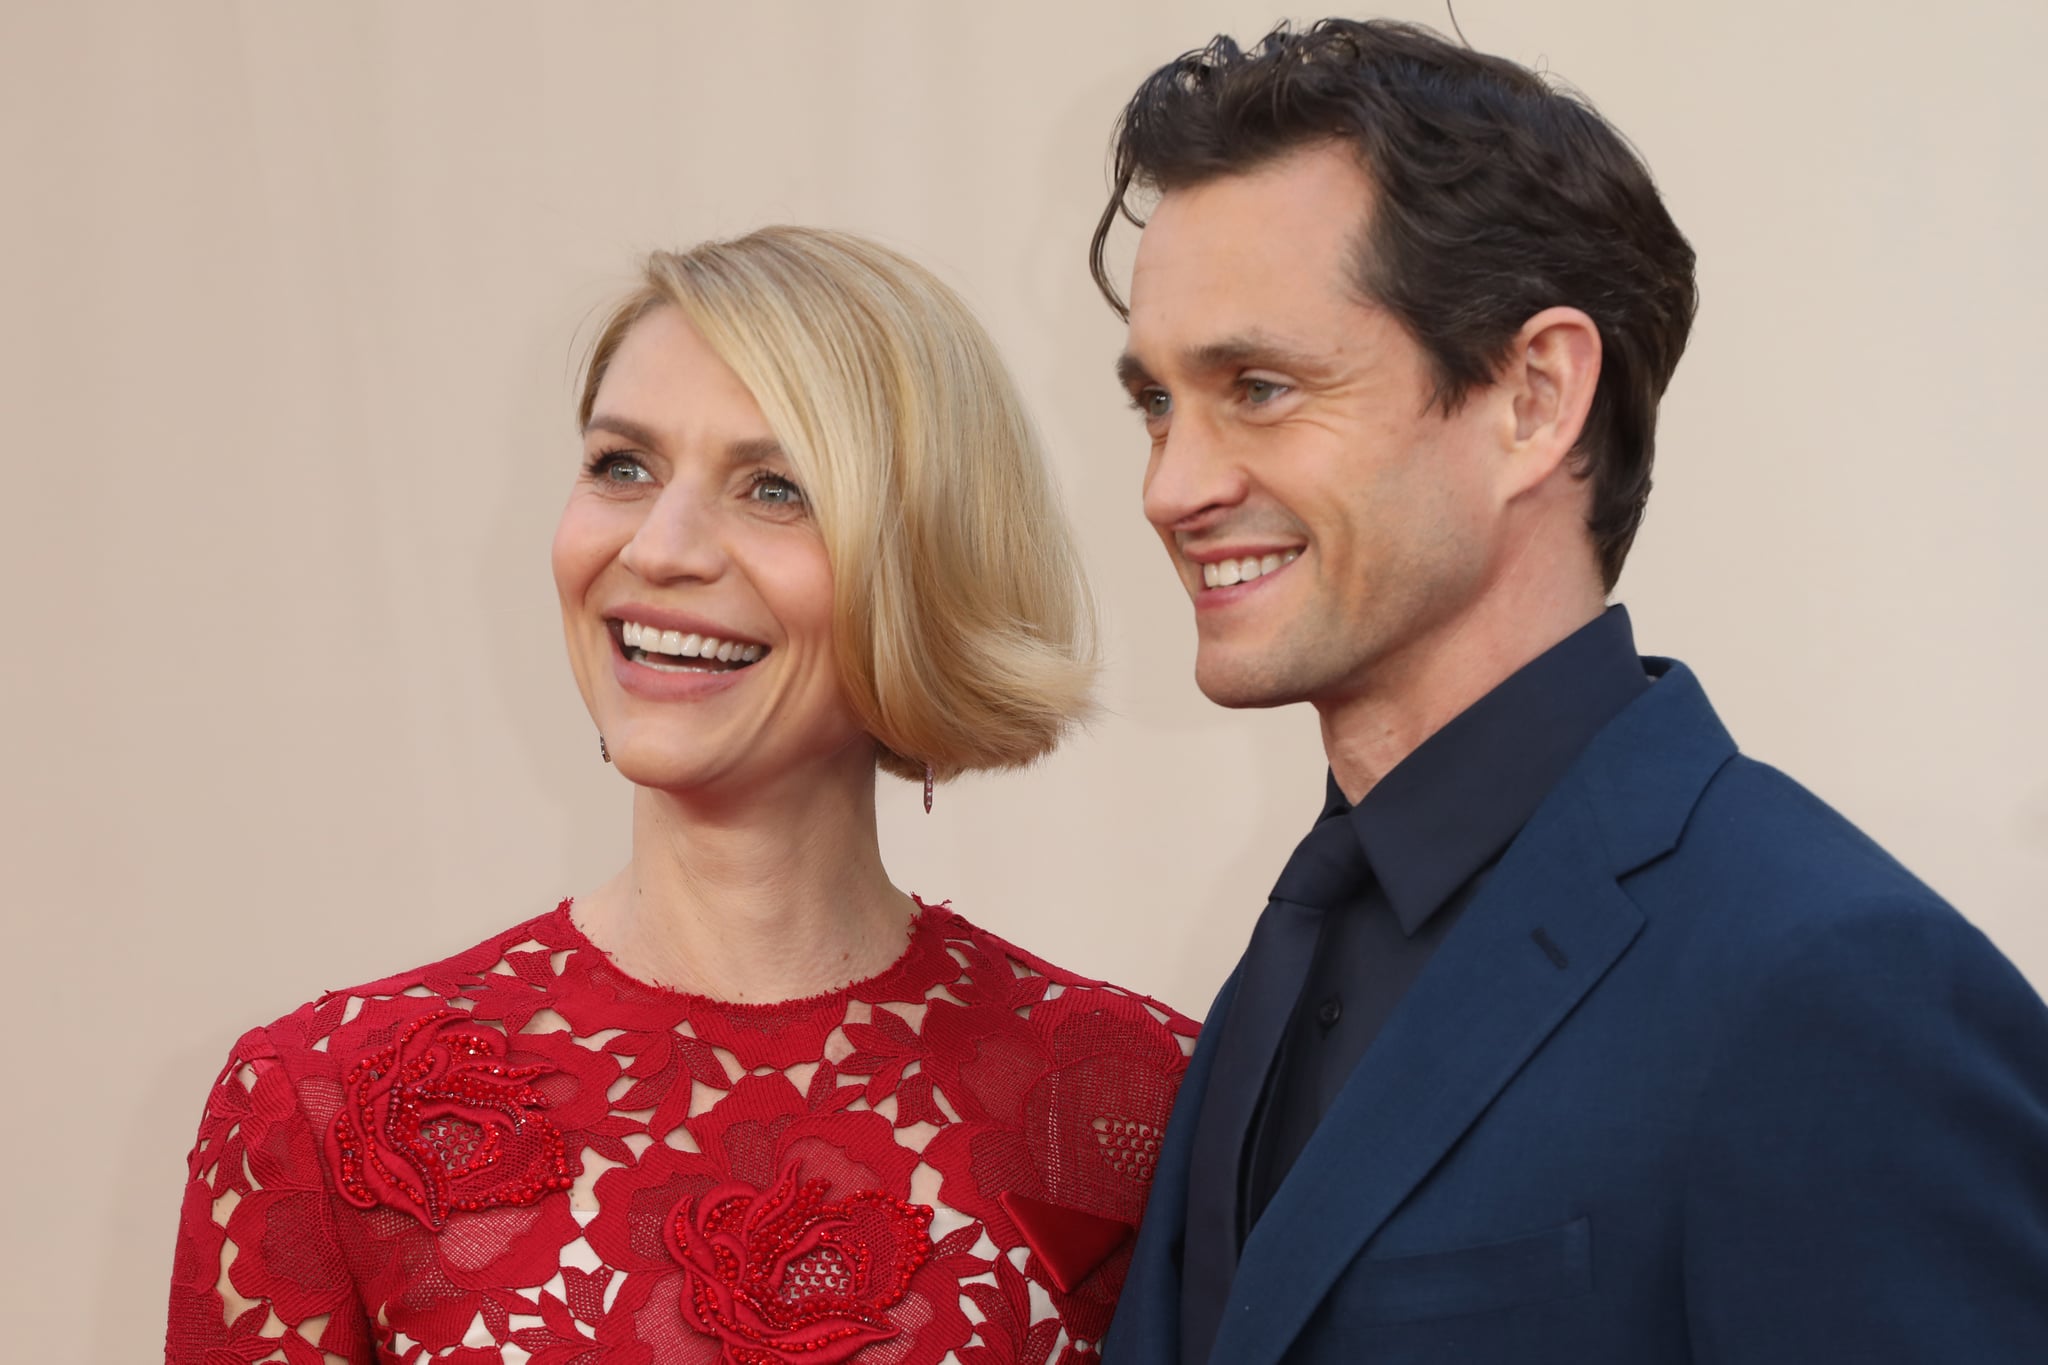 LONDON, ENGLAND - APRIL 25: Claire Danes and Hugh Dancy attend the World Premiere of 